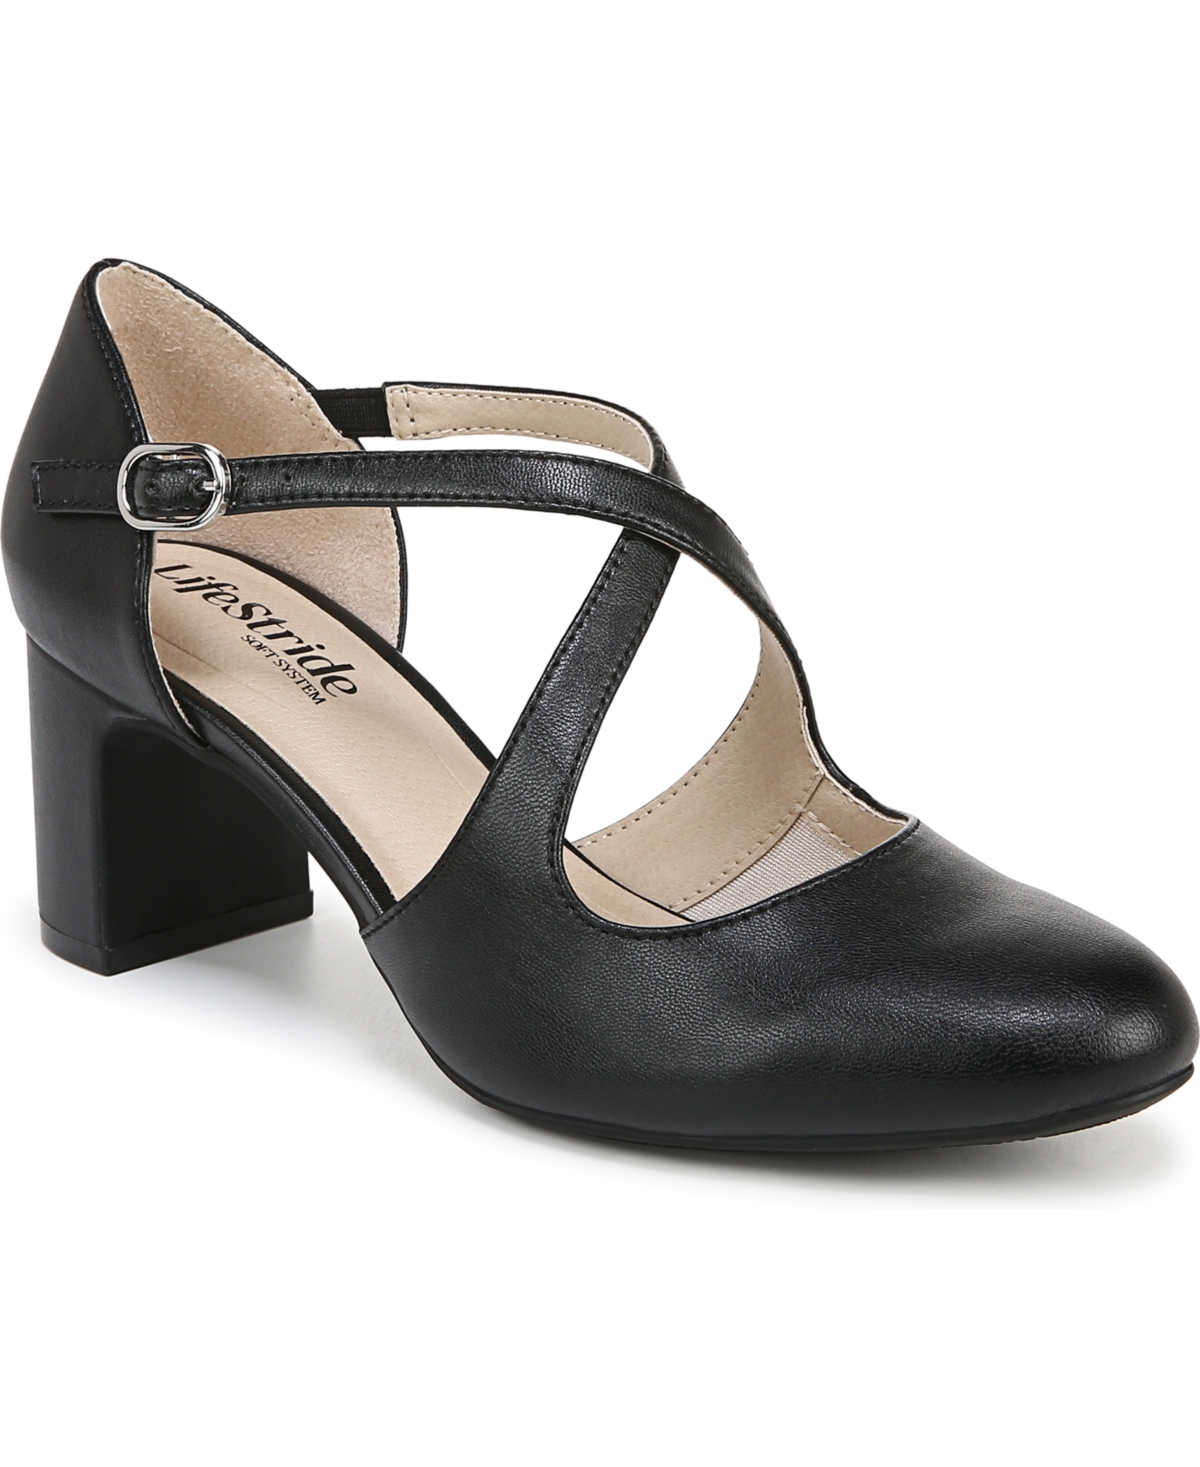 Lifestride Tracy Pumps In Black Faux Leather